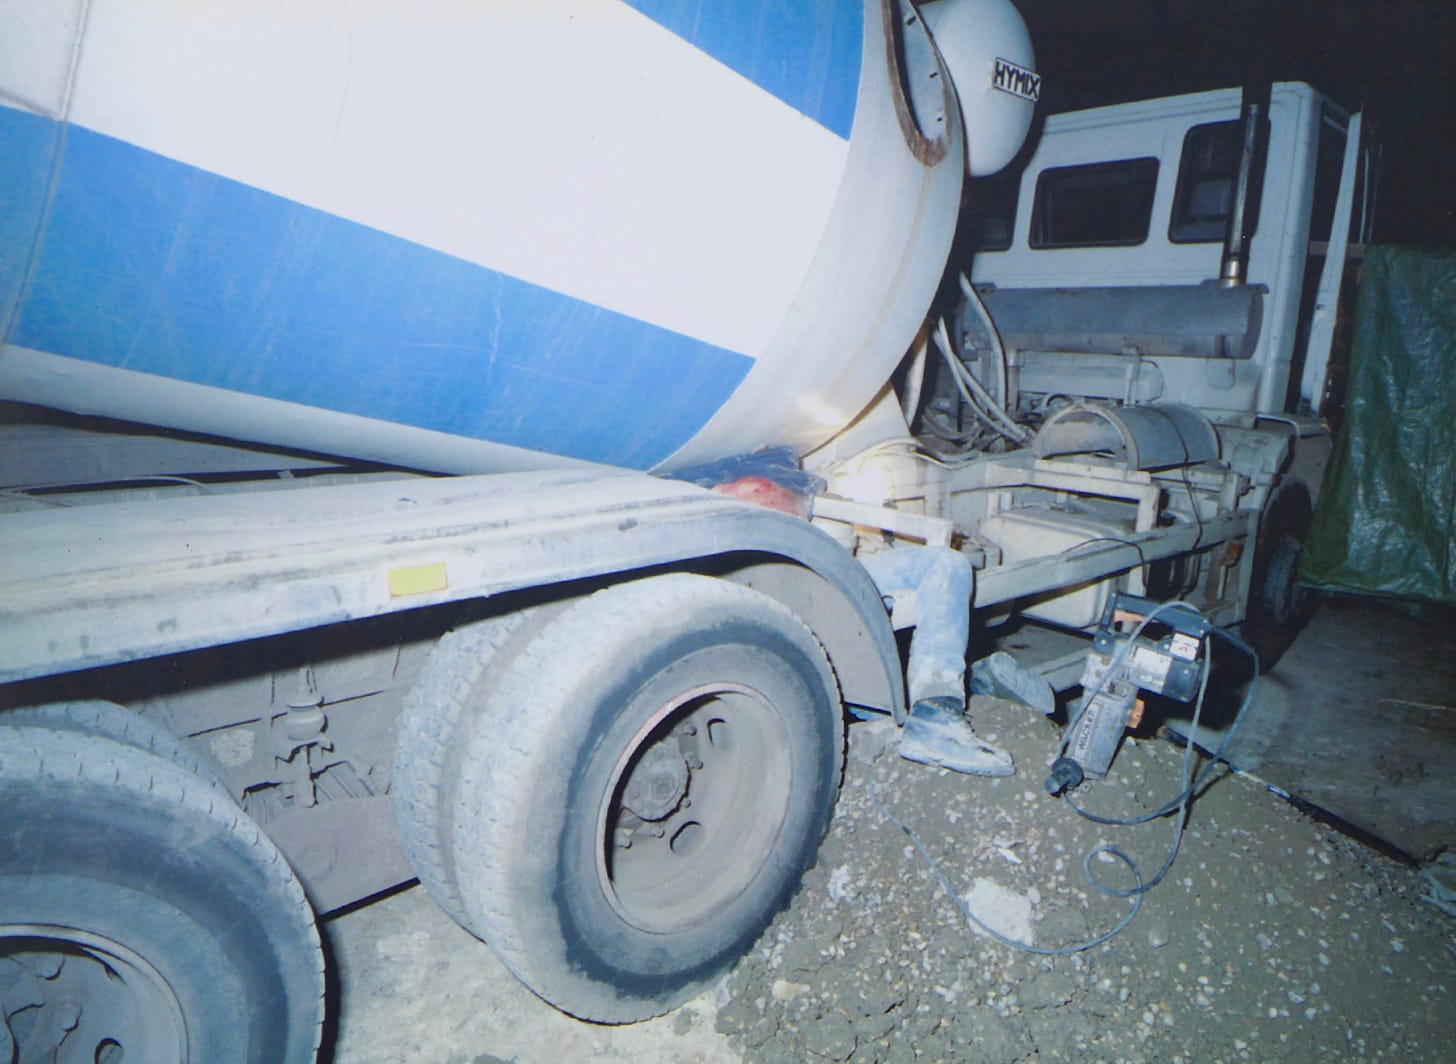 OPERATION INSIPID - Police spied on Father of Cement Mixer 'Murder' Victim Https%3A%2F%2Fbucketeer-e05bbc84-baa3-437e-9518-adb32be77984.s3.amazonaws.com%2Fpublic%2Fimages%2F332d589d-30b6-4839-a49a-e73bc45c5fbb_3133x2290